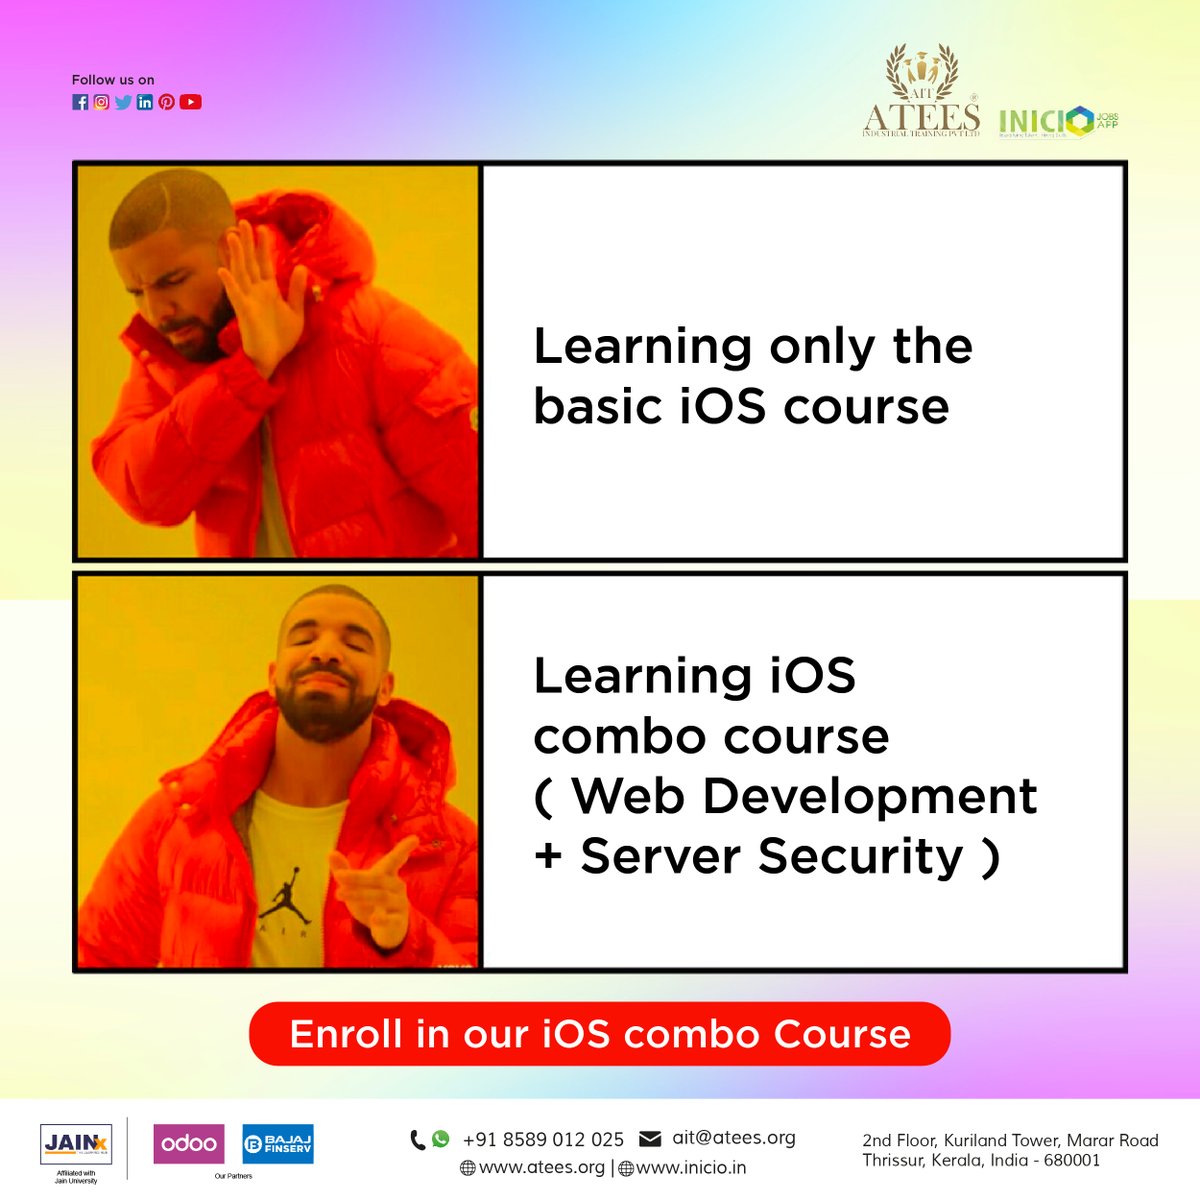 The best way to learn is by doing. Enroll in our iOS combo course (Web Development + Server Security) and secure a well-paid job in the IT industry.
#ios #webdevelopment #course #learningeveryday #webdesignanddevelopment #learnnewskills #atees #course #study #DiplomaCourses